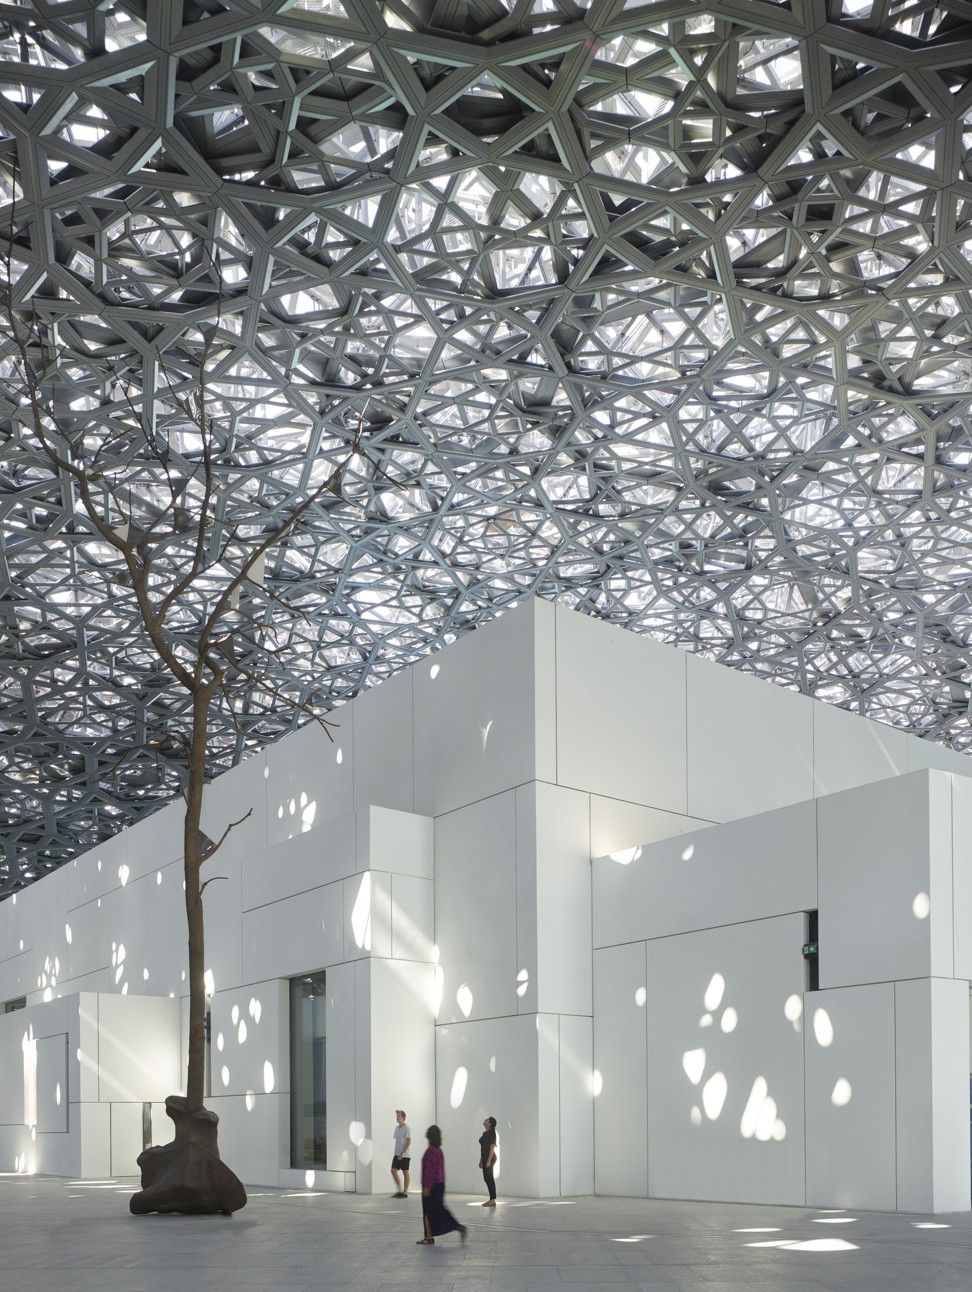 The museum dome's eight layers of interlocking steel and aluminium create more than 7,800 “stars” that filter sunlight, creating a microclimate and reducing the temperature inside by five degrees Celsius. Photo: Roland Halbe